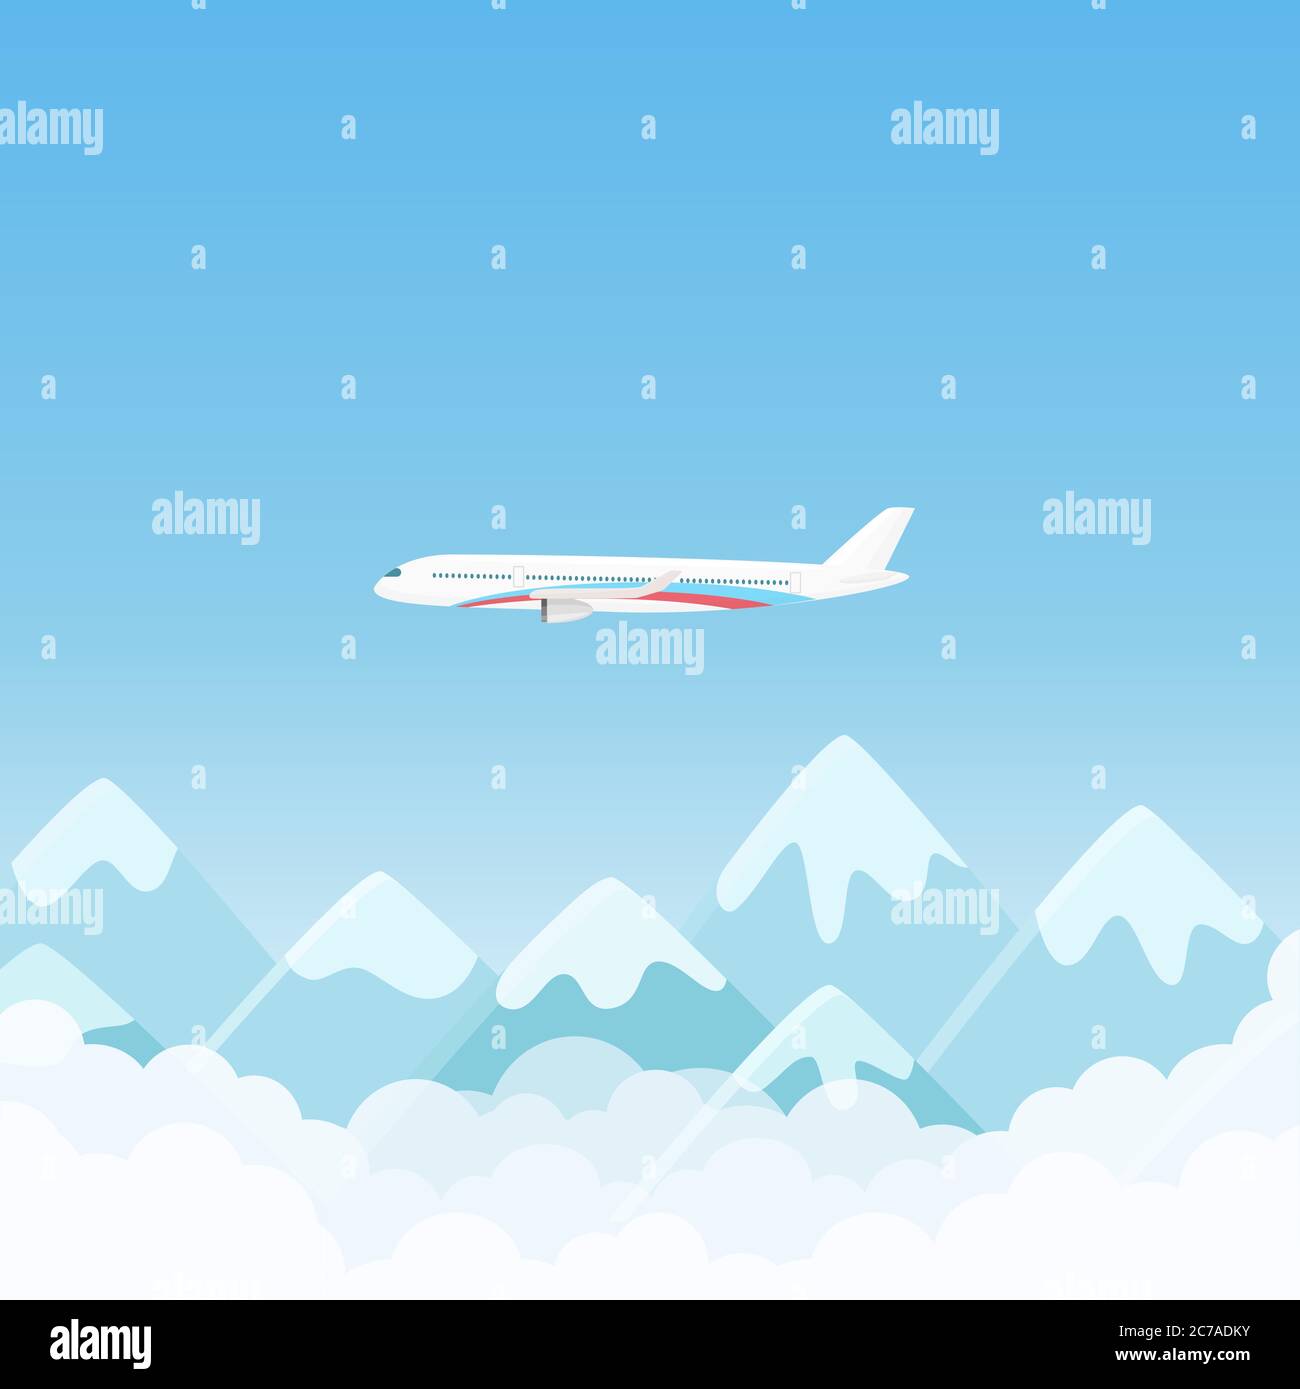 Flat travel banner with aircraft with mountains in clouds vector illustration Stock Vector